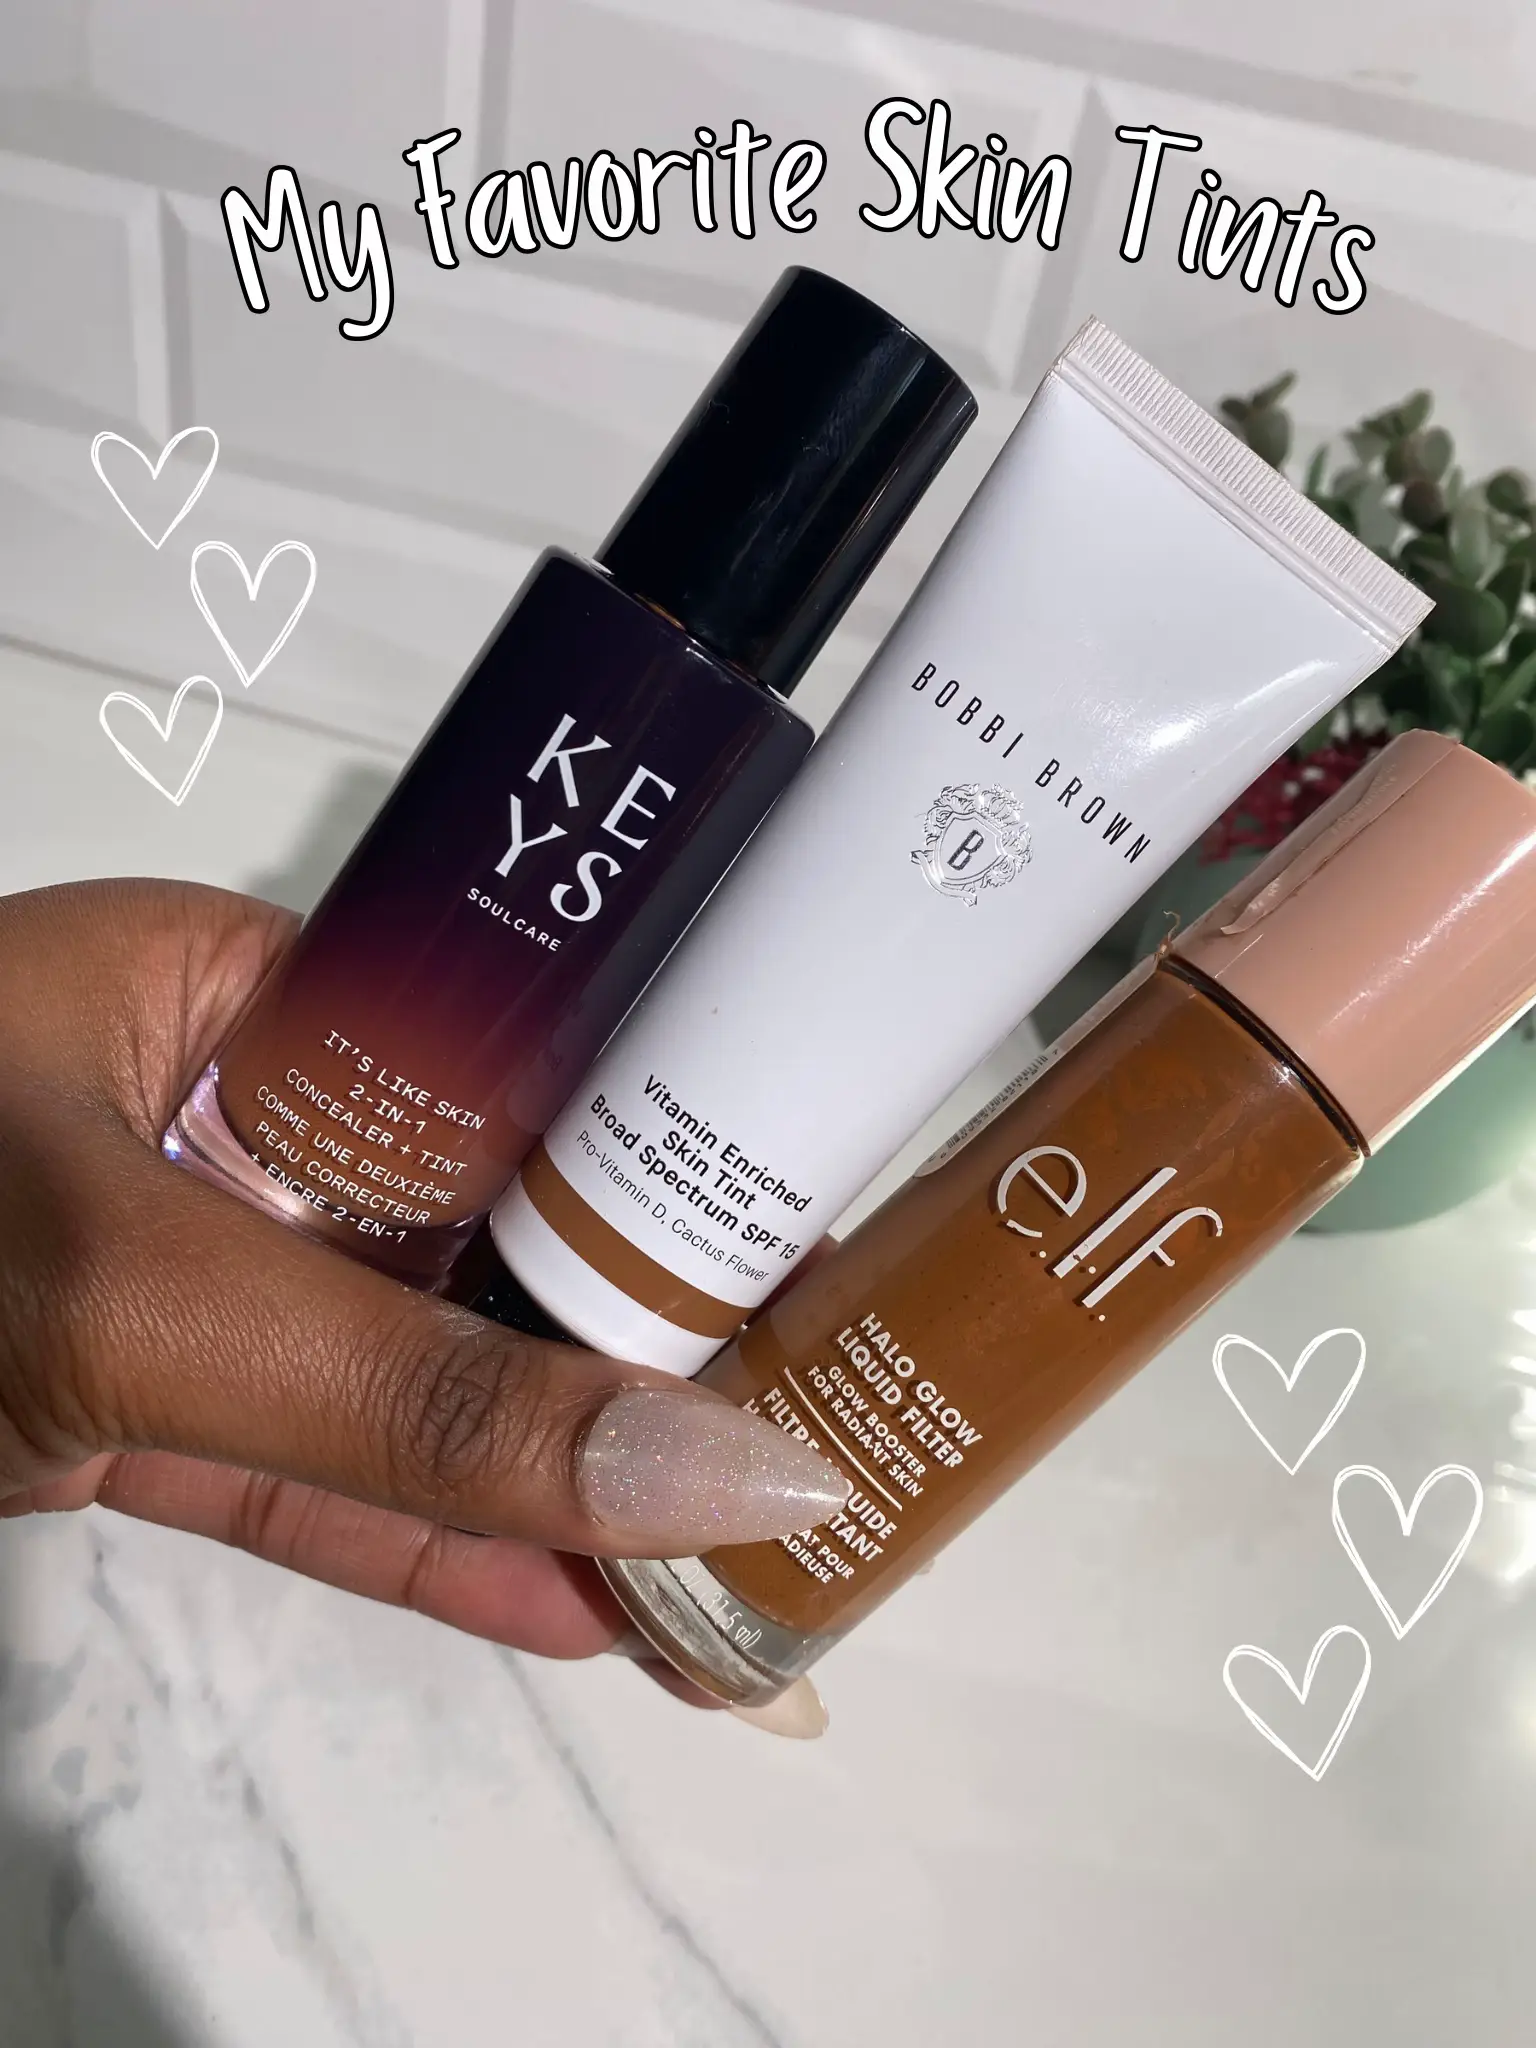 5 skin tints to use during this time (since foundation is out the